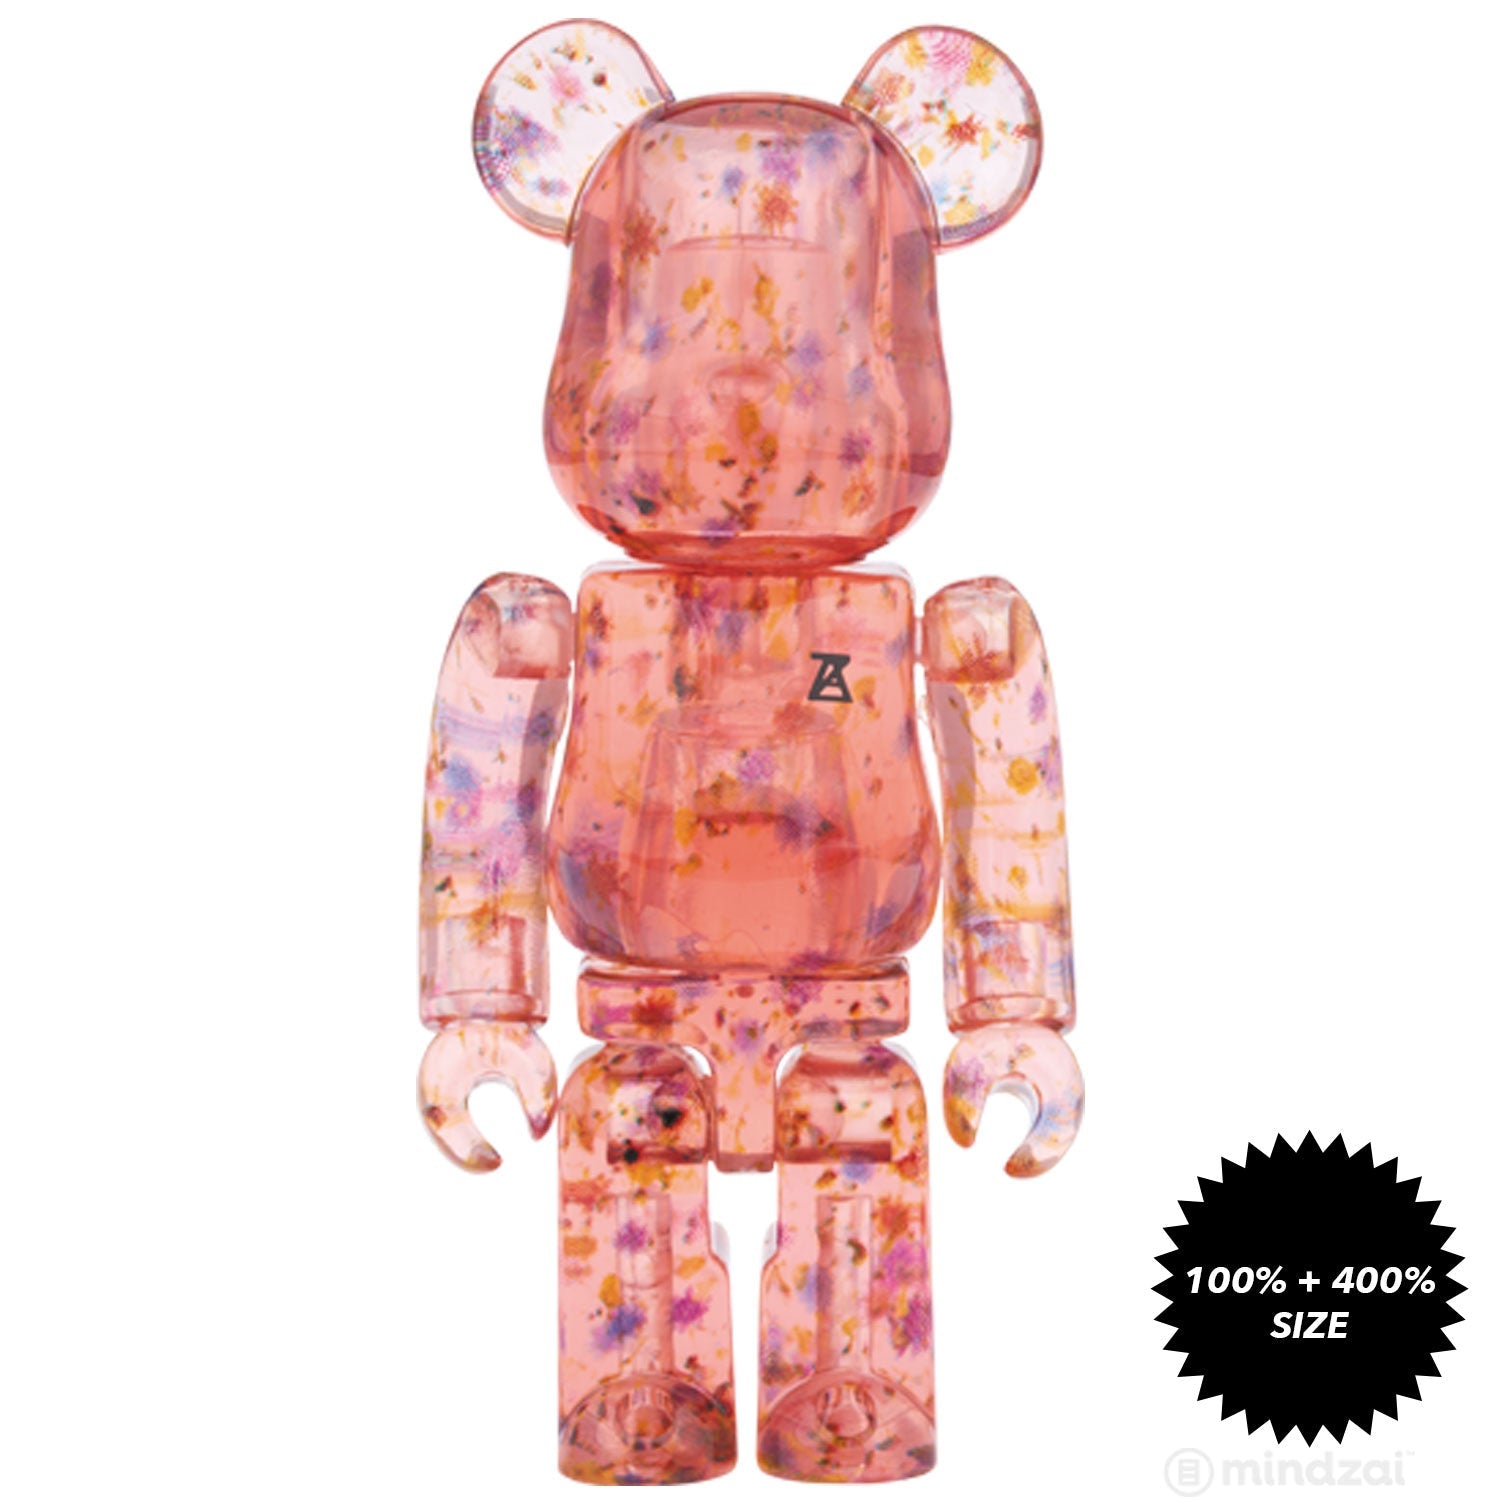 Flower Clear Red Edition 100% + 400% Bearbrick Set by Anrealage x Medicom Toy